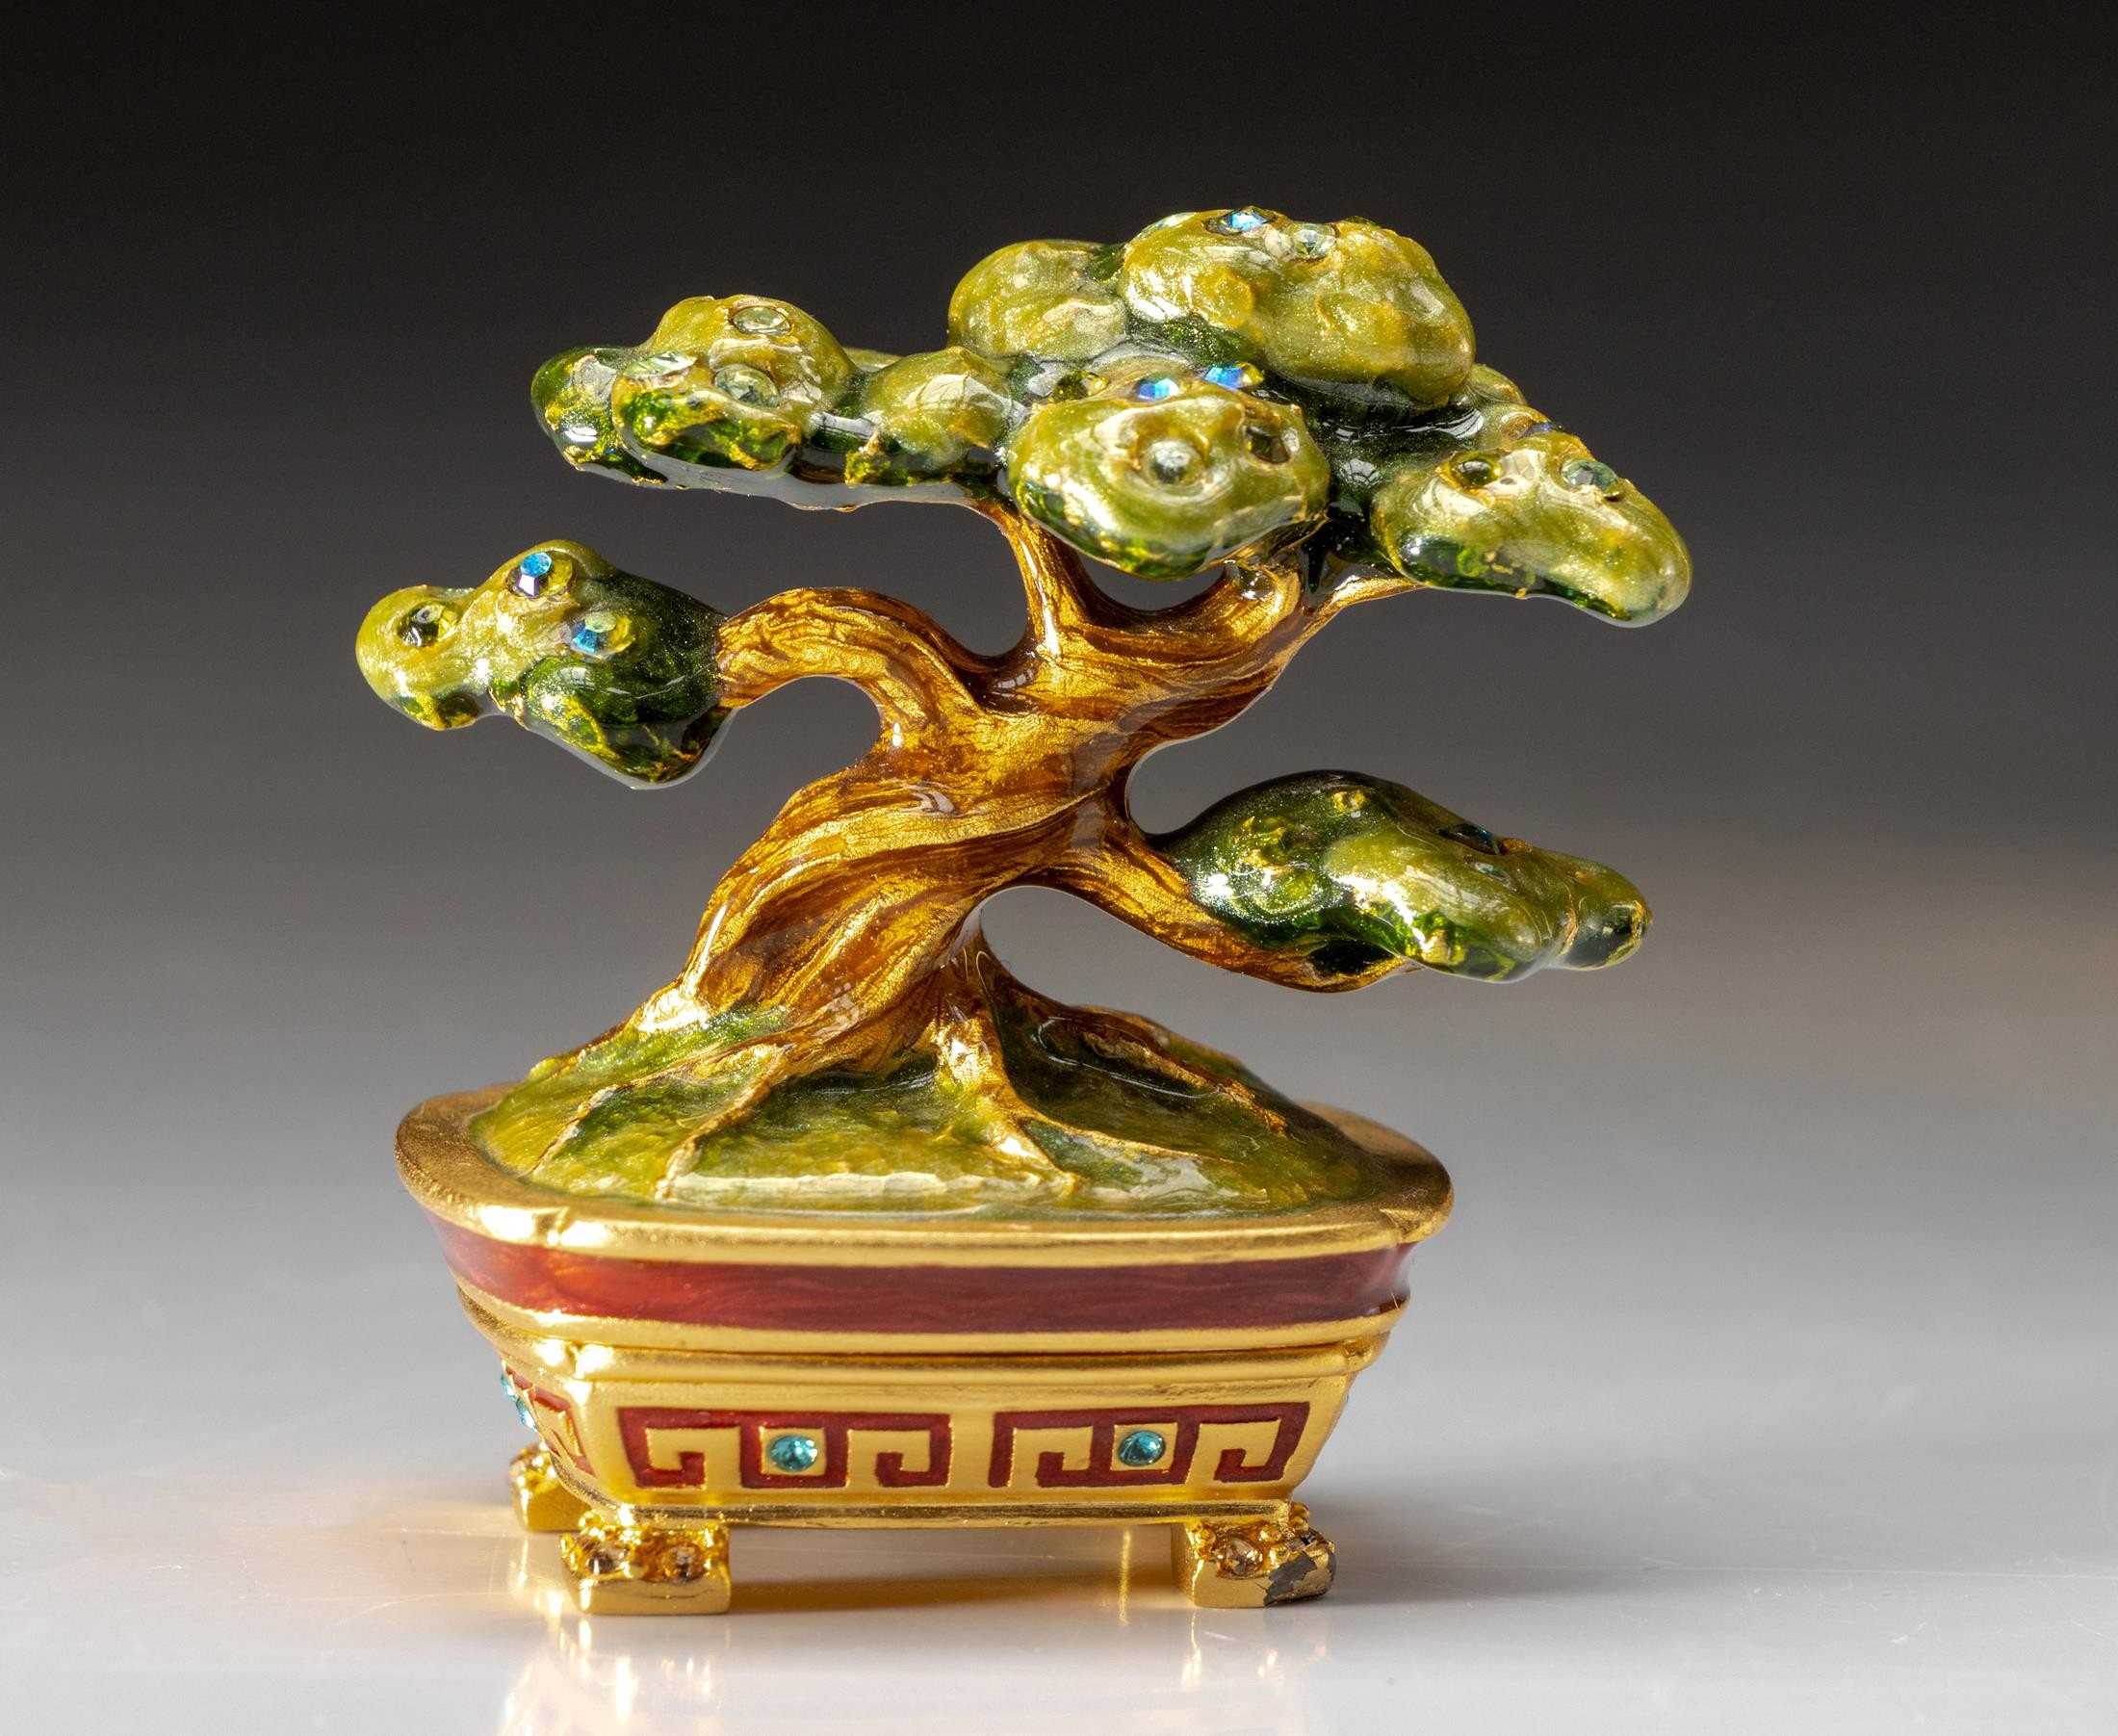 AN ESTEE LAUDER SOLID PERFUME COMPACT, MAGNIFICENT BONSAI - DESIGNED BY JAY STRONGWATER, 2007